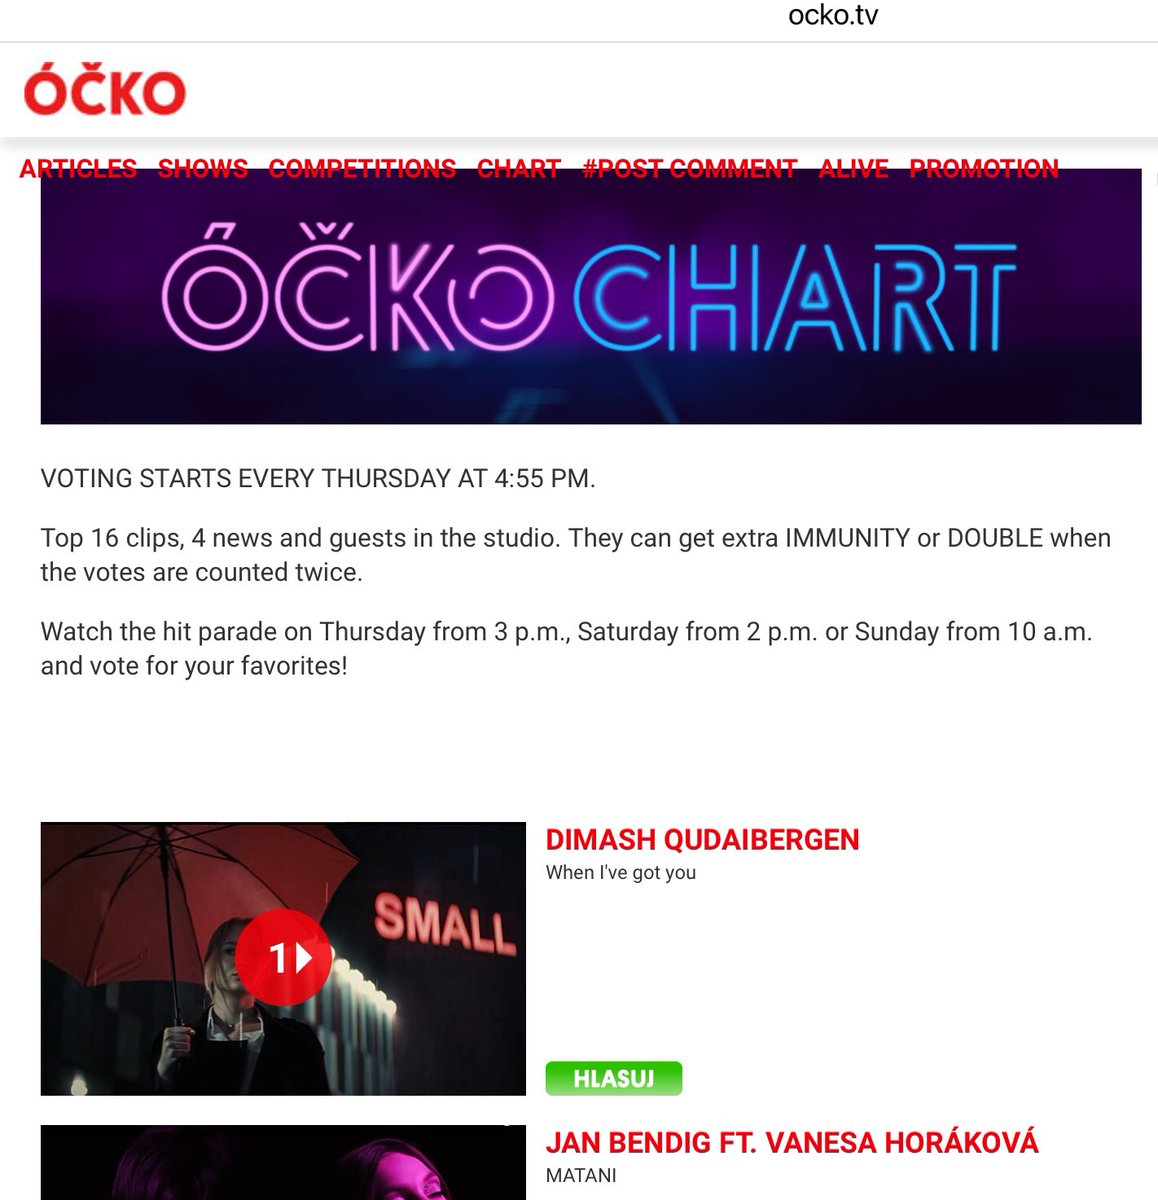 We congratulate @dimash_official for being ranked #1 on Czech Ocko TV music chart this week with his new MV #WhenIveGotYou 👏🥇 Good job #Dears 🌹 For voting for the next week’s chart 👉 ocko.tv/ocko-chart